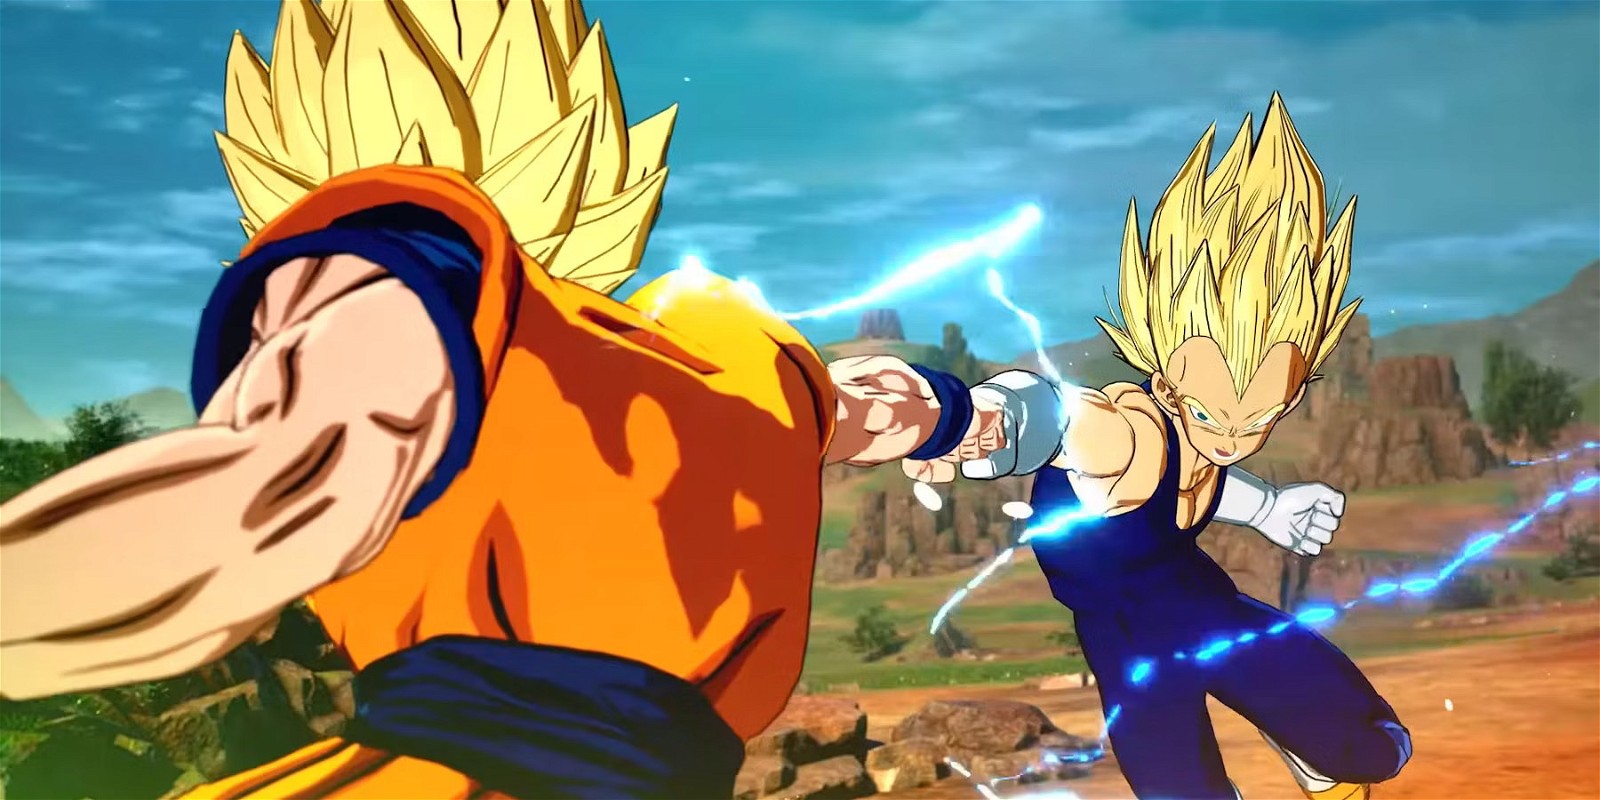 Dragon Ball Sparking Zero released a Rivals trailer a couple of weeks ago. Credits: Bandai Namco